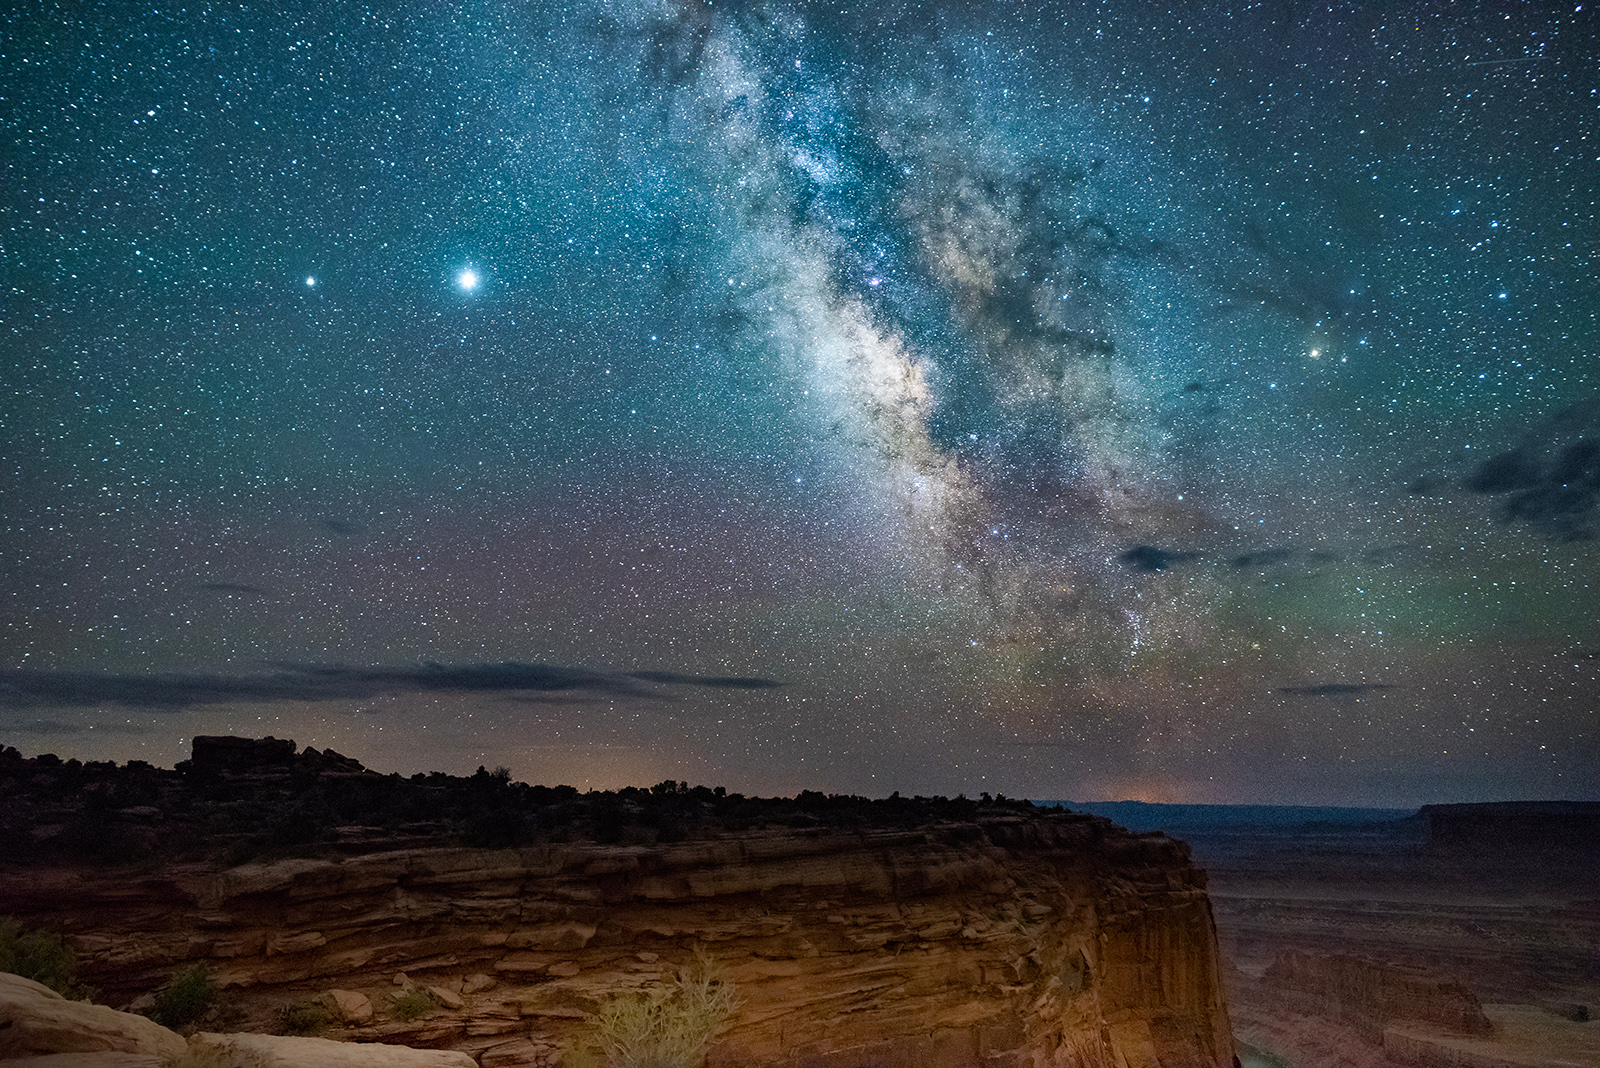 View of stary night sky's at Canyonlands National Park